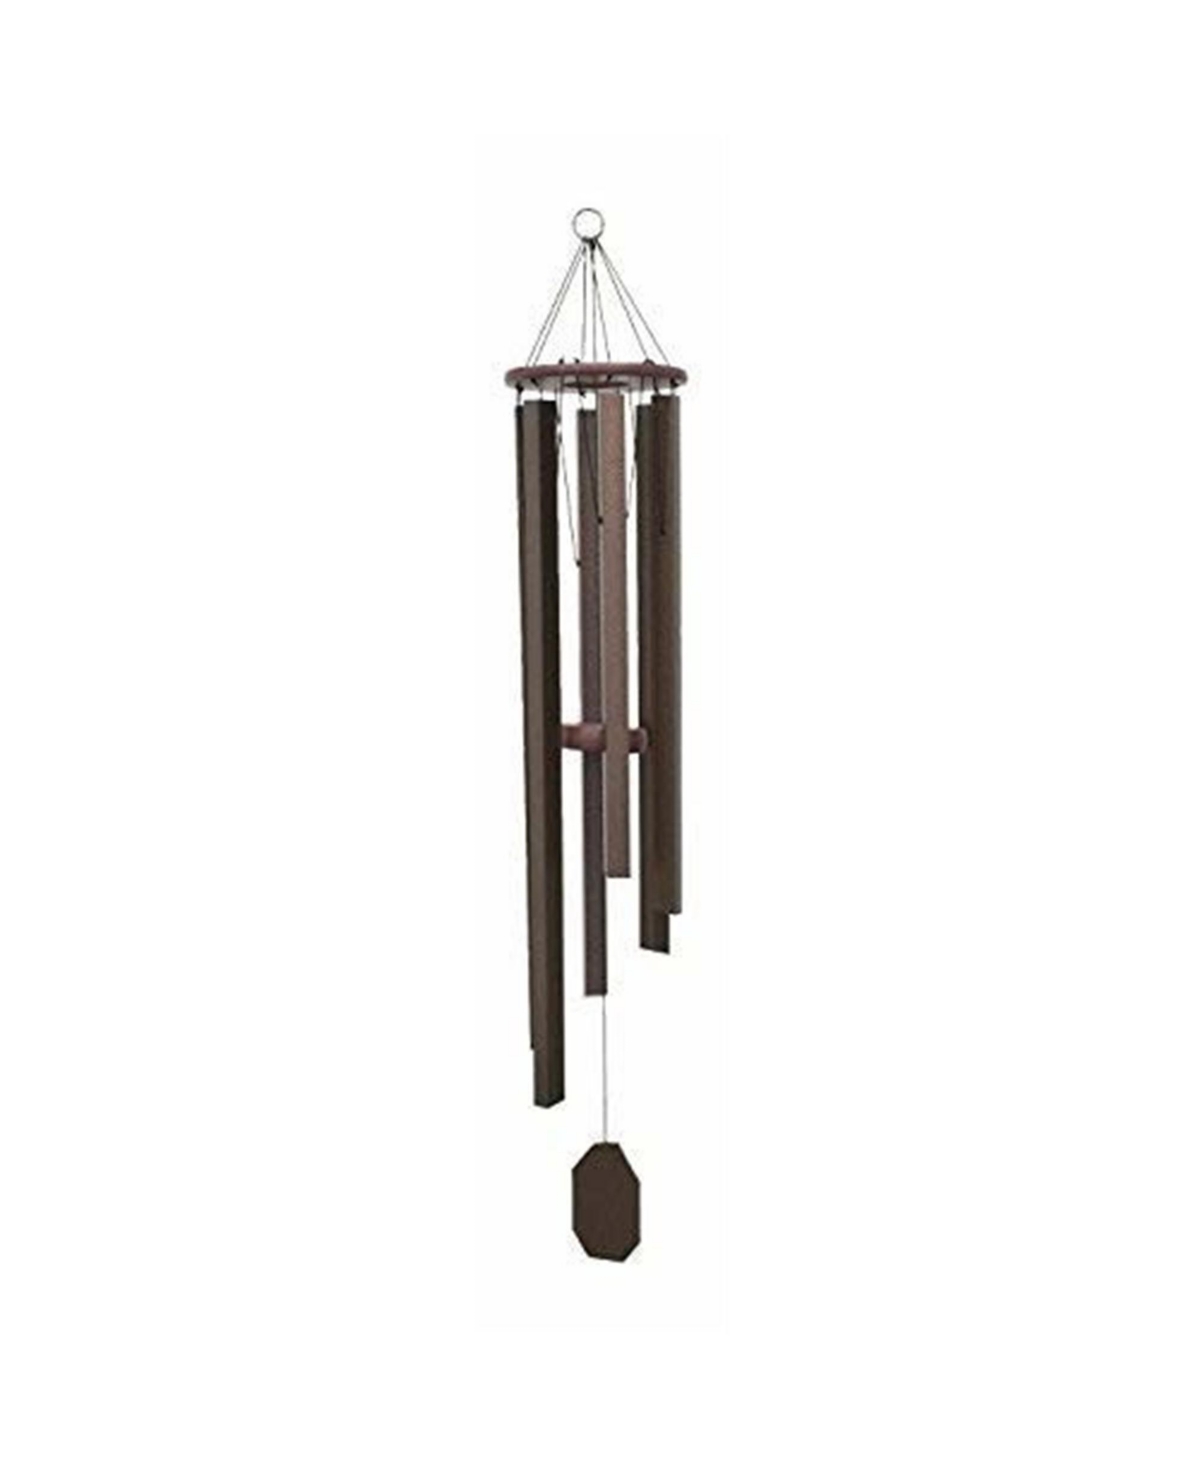 Lambright Chimes Outdoor Wind Chime Bronze Finish